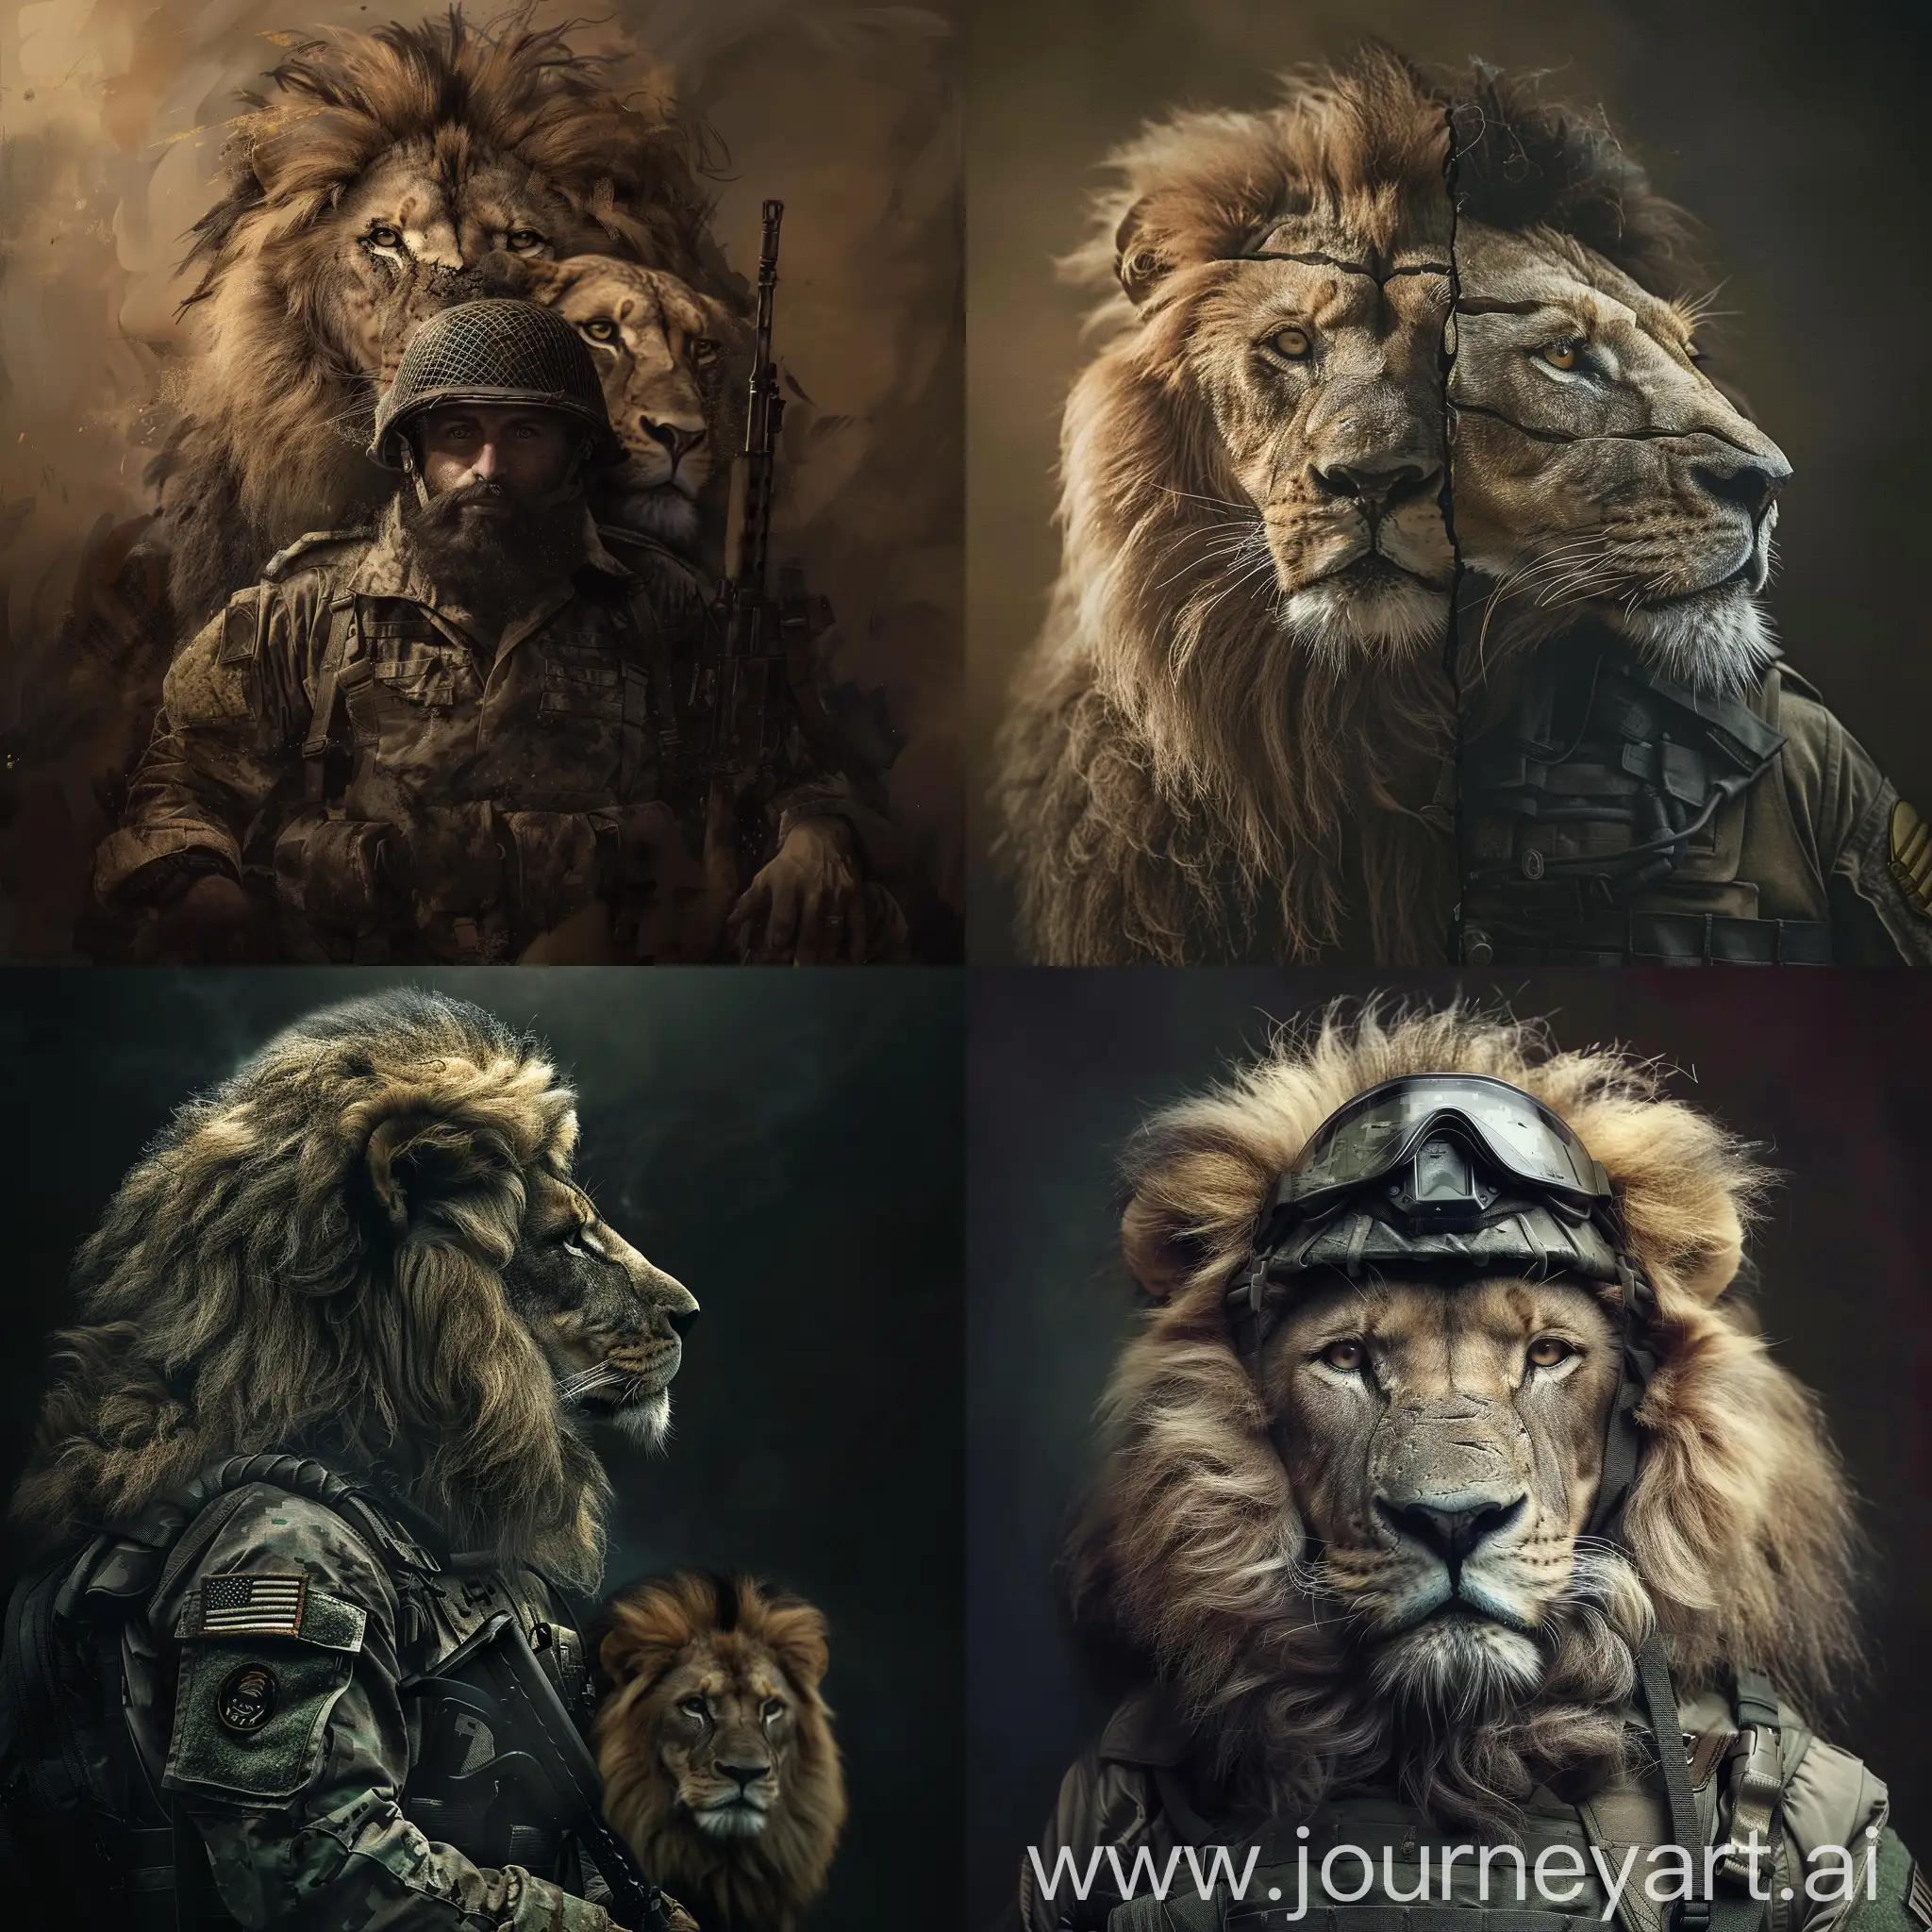 hybrid - soldier and lion